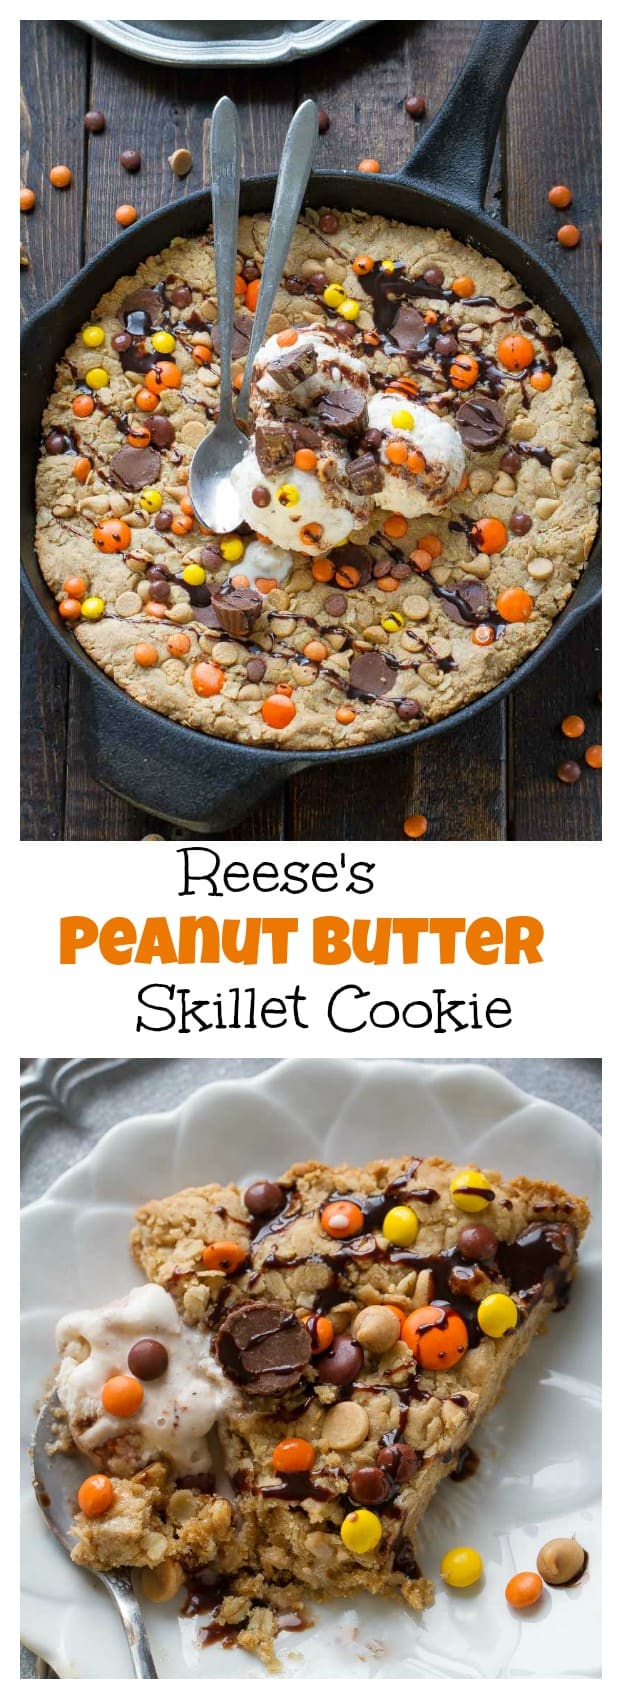 Reese's Peanut Butter Skillet Cookie is soft, chewy & makes the perfect treat to share with a crowd